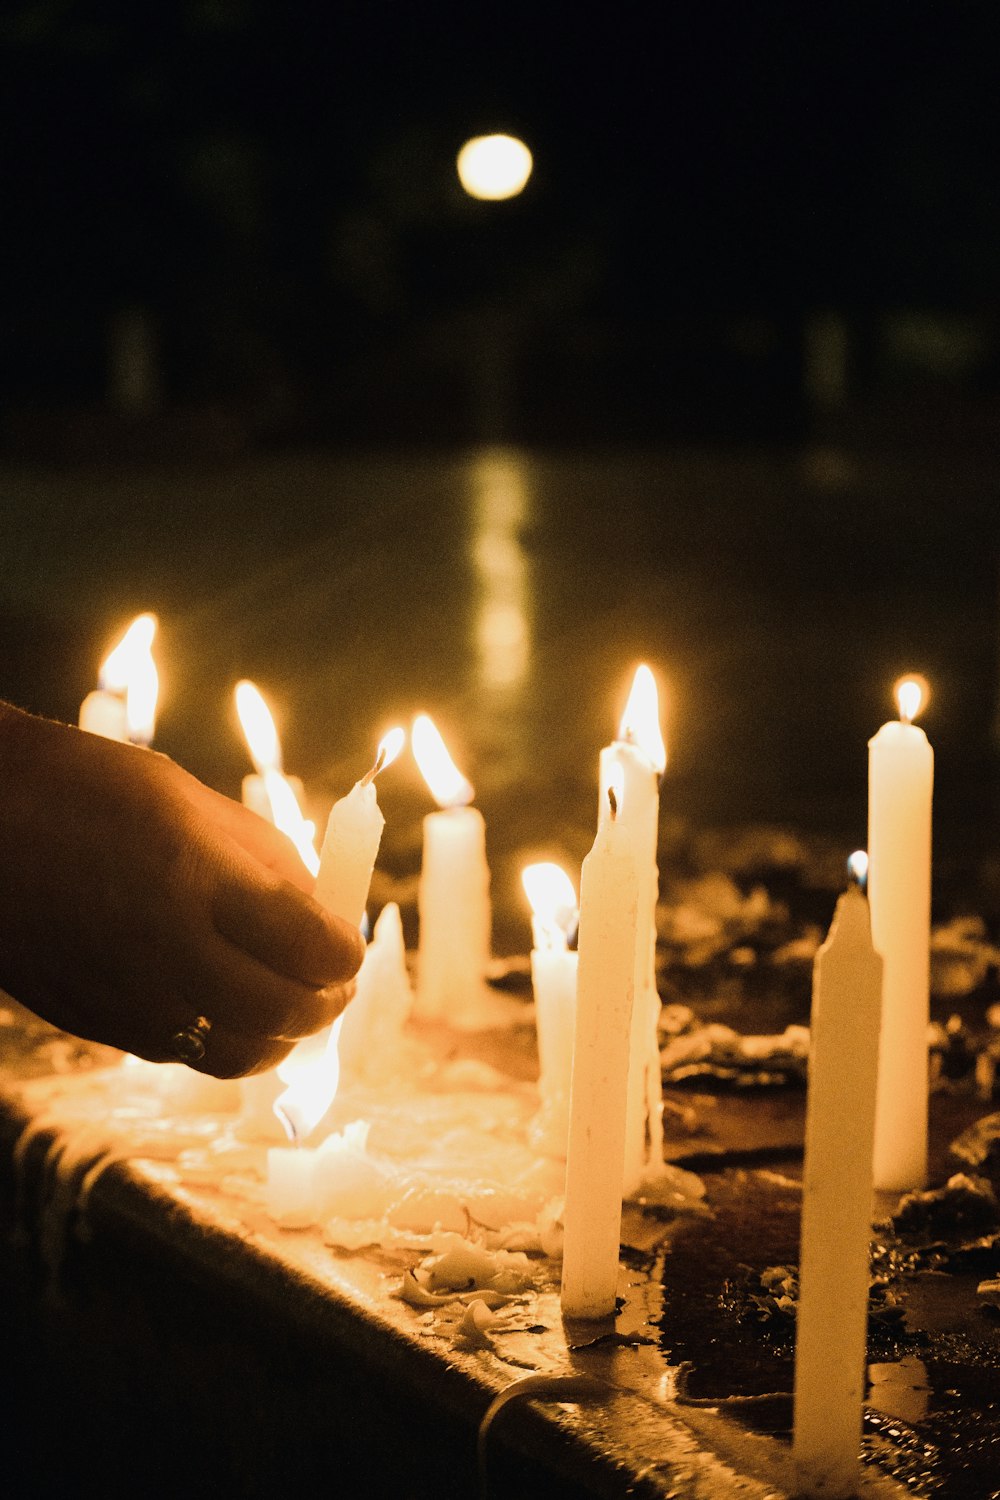 a person lighting candles on a table in the dark